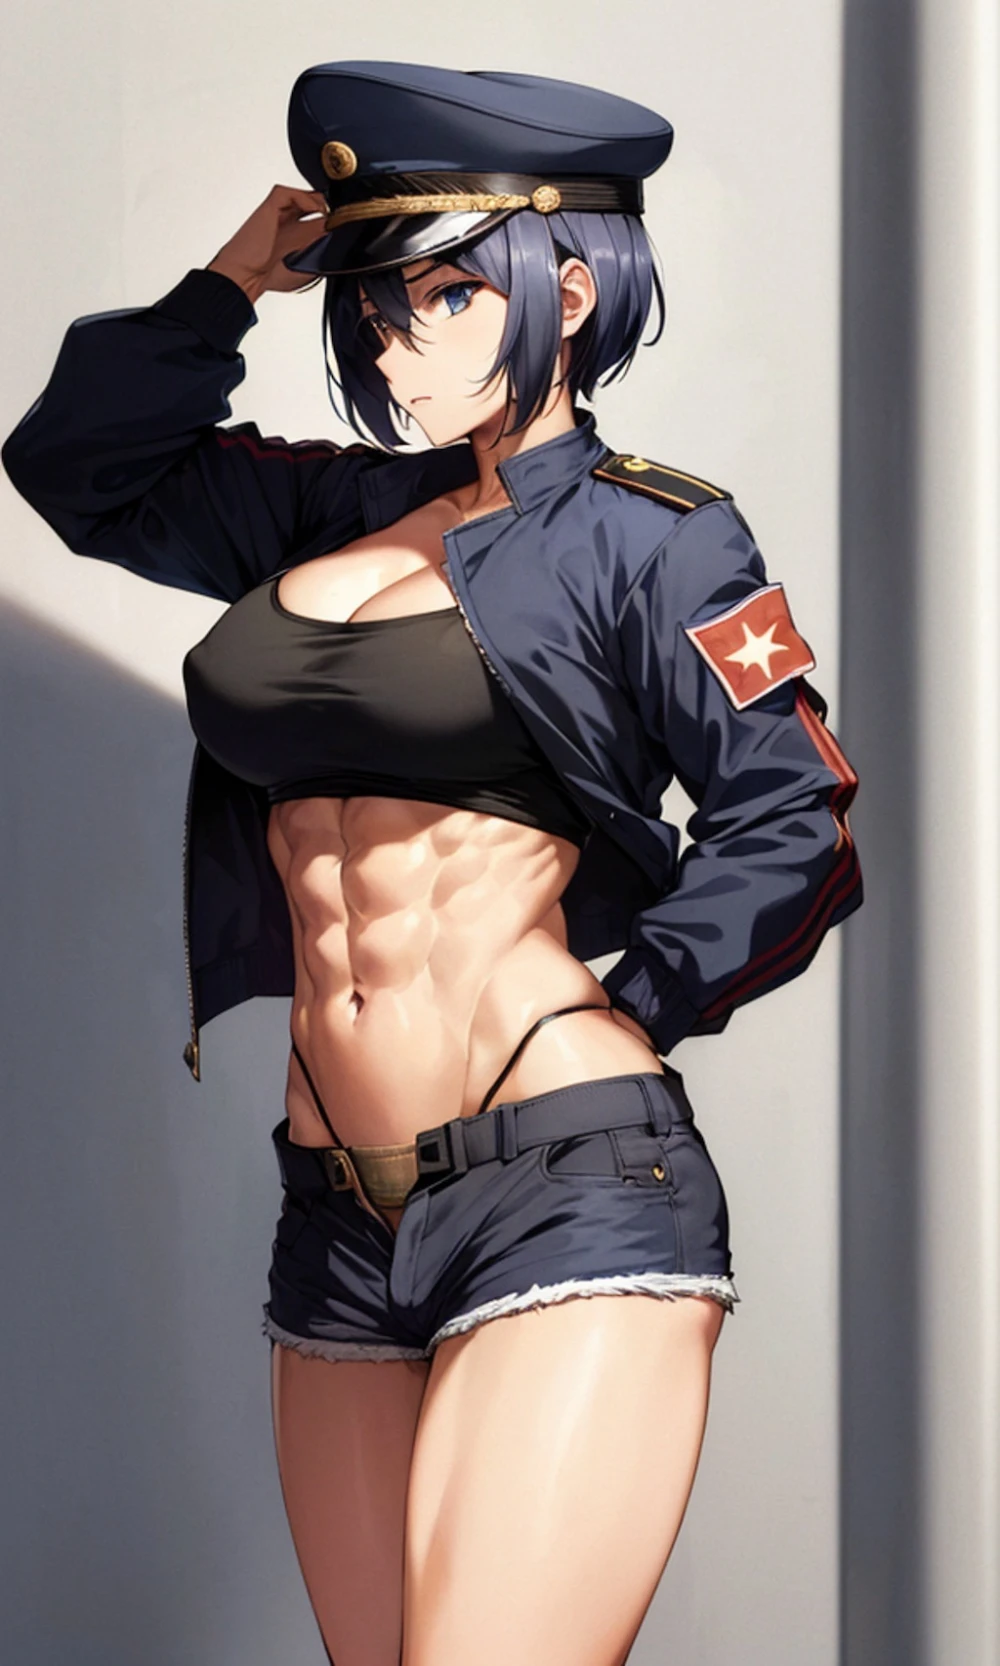 military-uniform-anime-style-all-ages-50